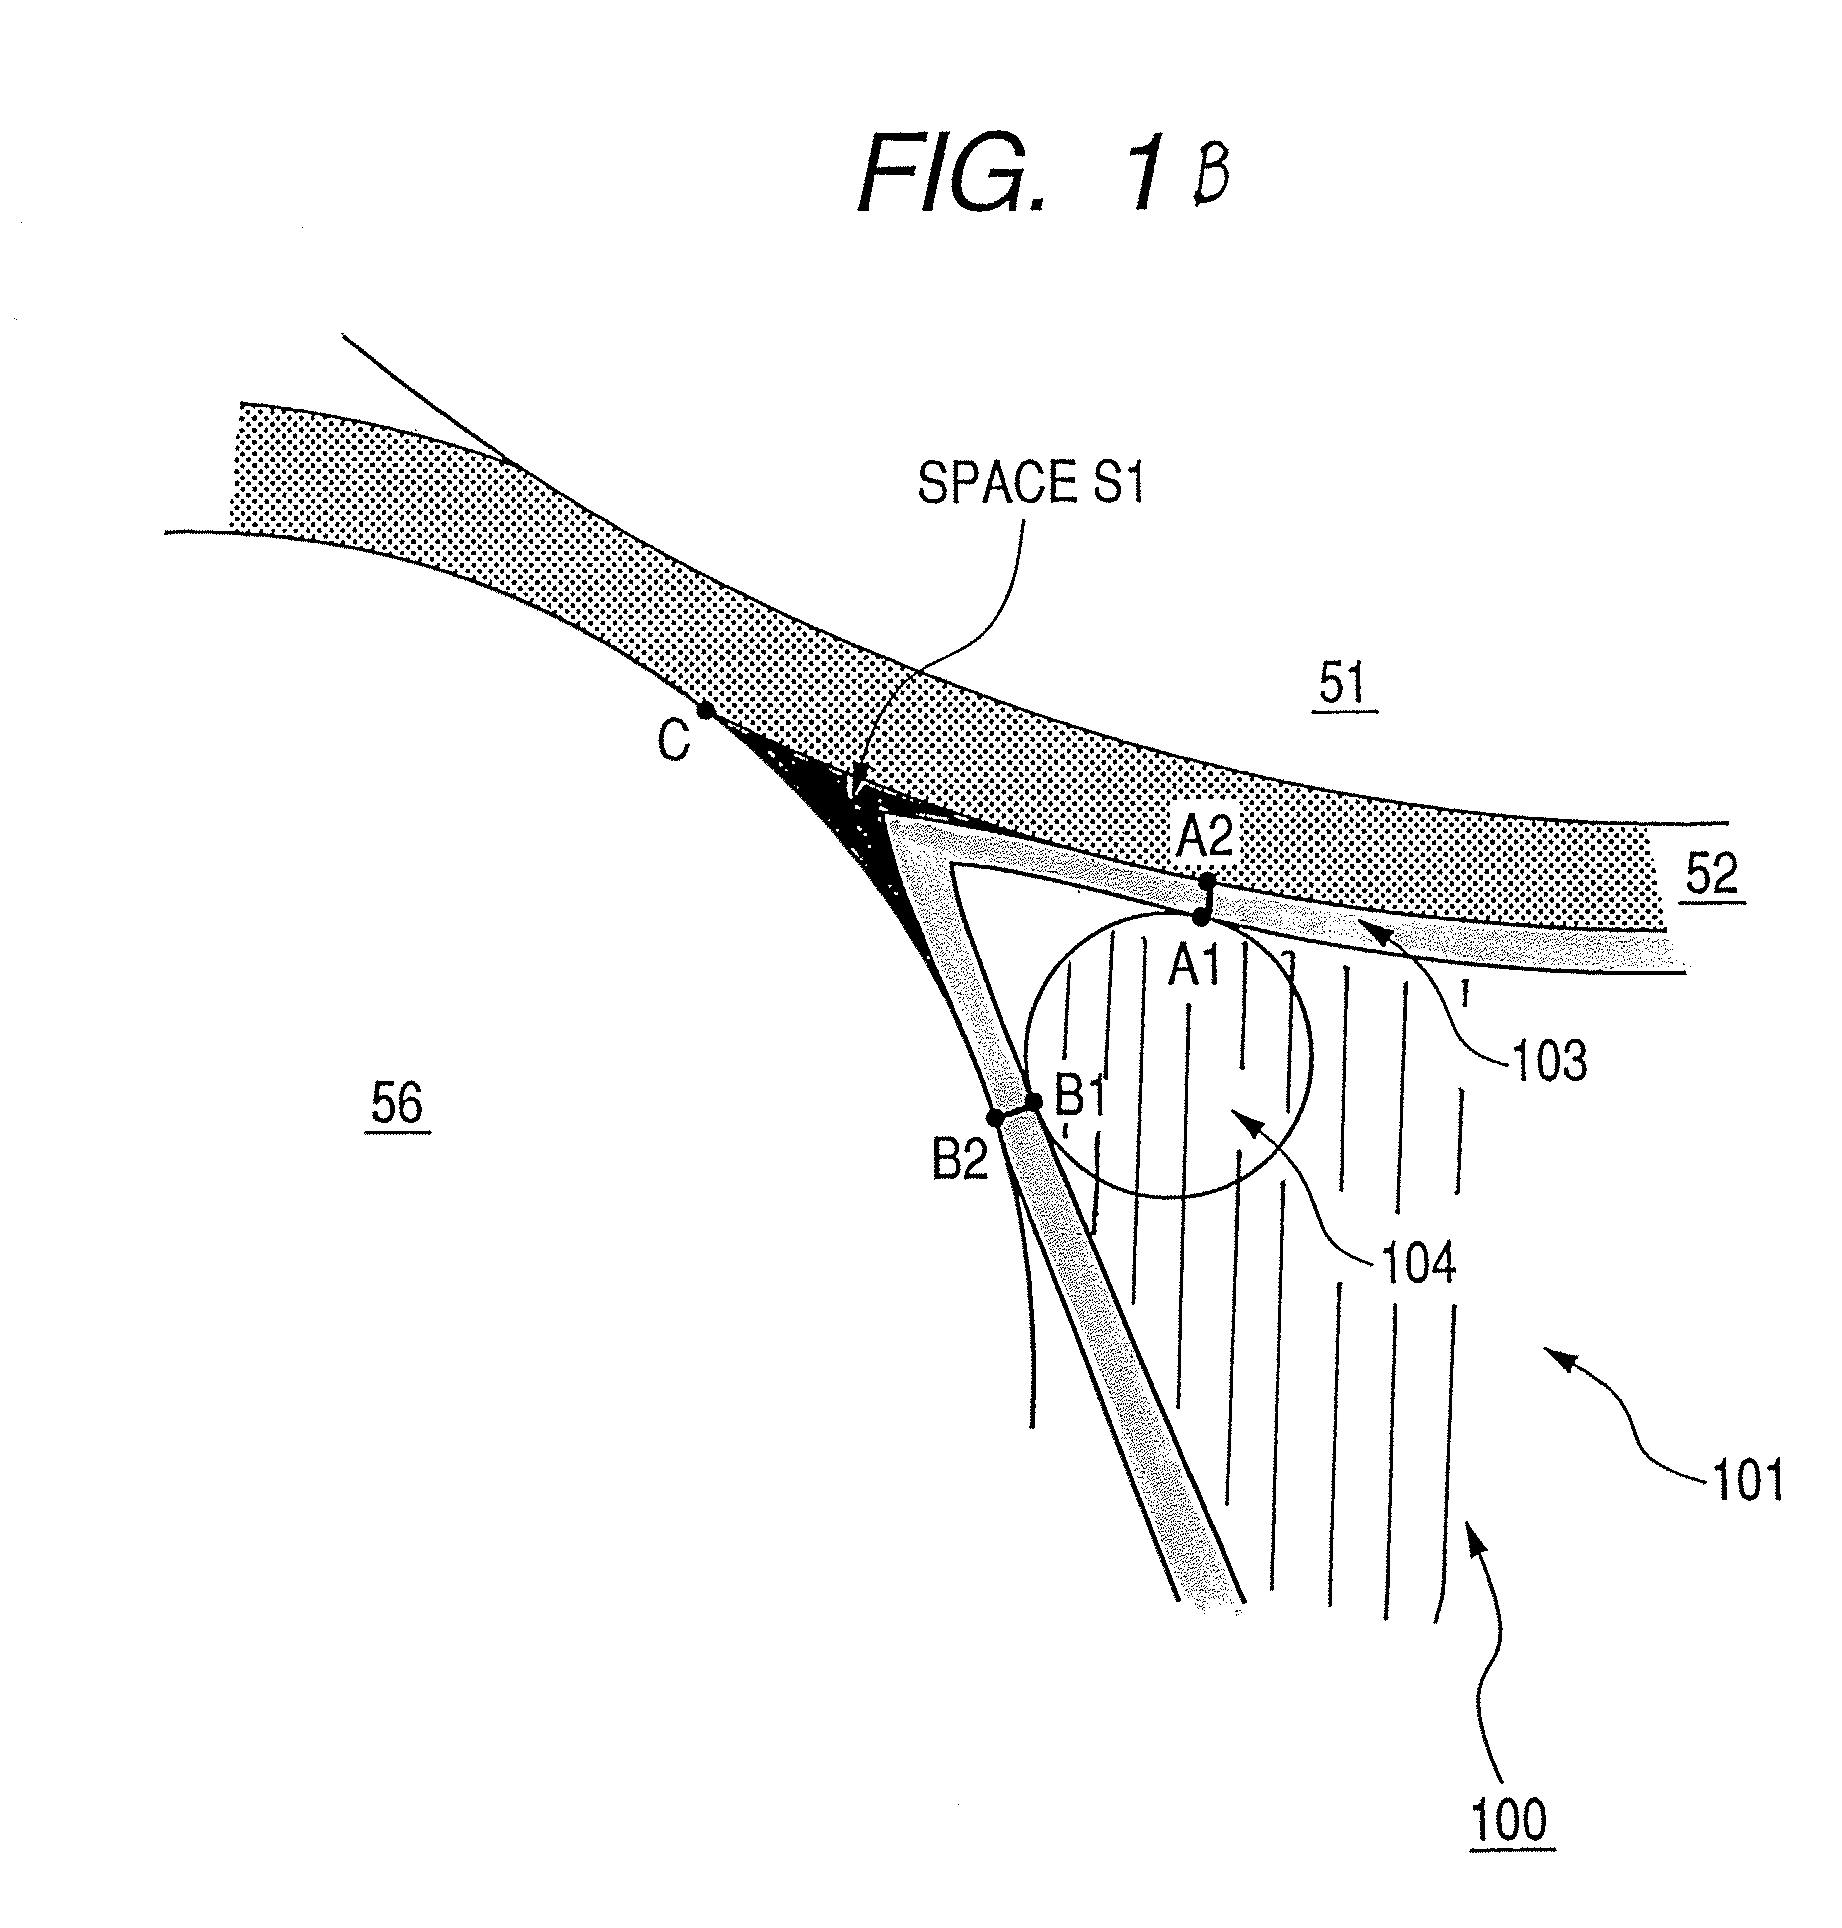 Image heating apparatus with heating nip for preventing image failure